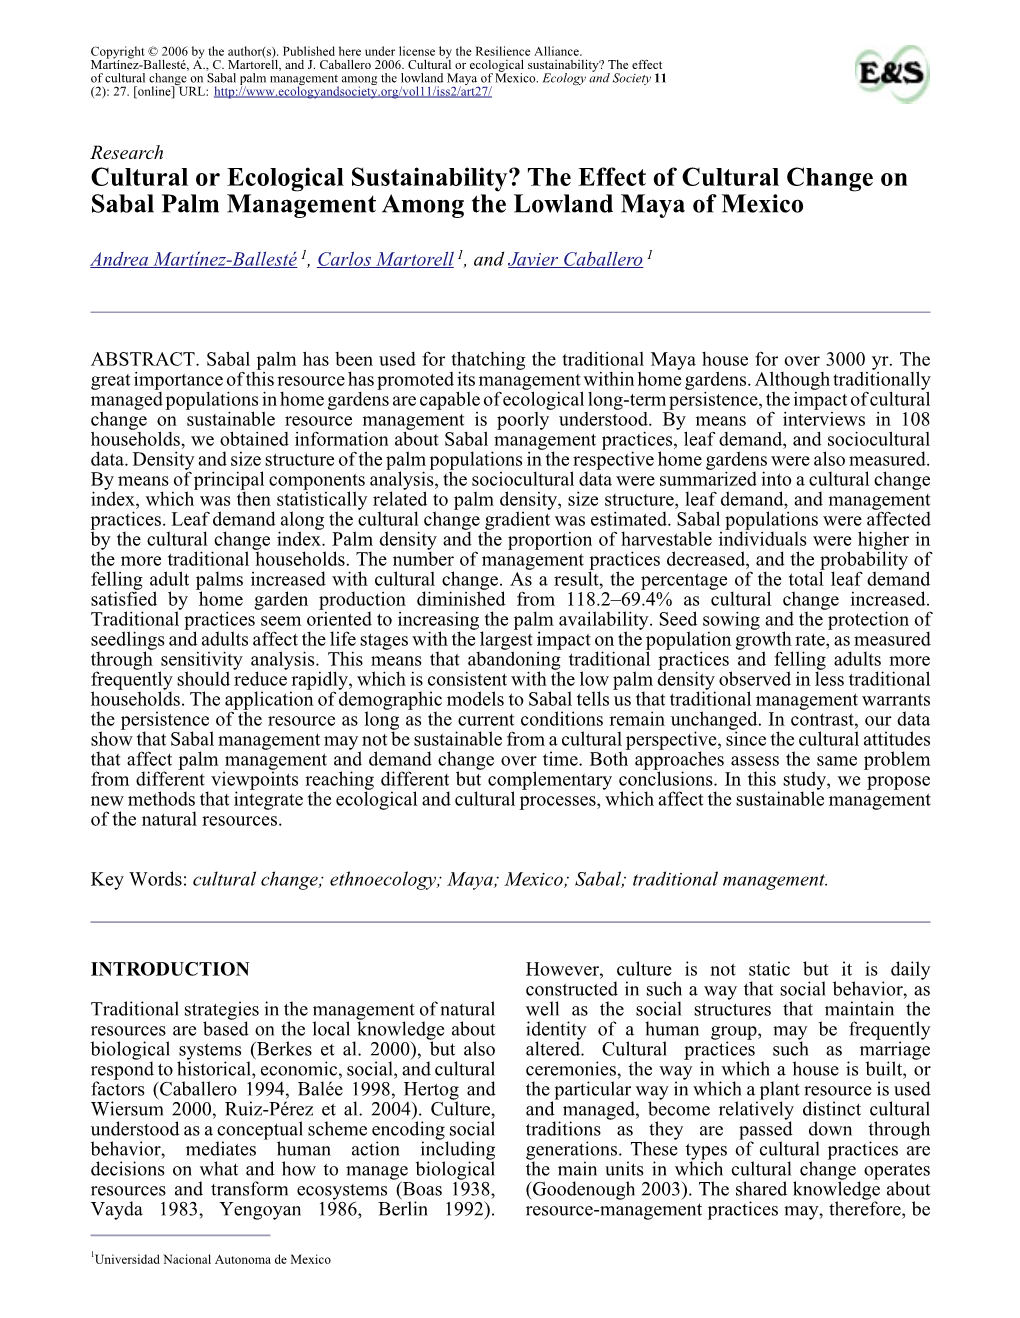 Cultural Or Ecological Sustainability? the Effect of Cultural Change on Sabal Palm Management Among the Lowland Maya of Mexico